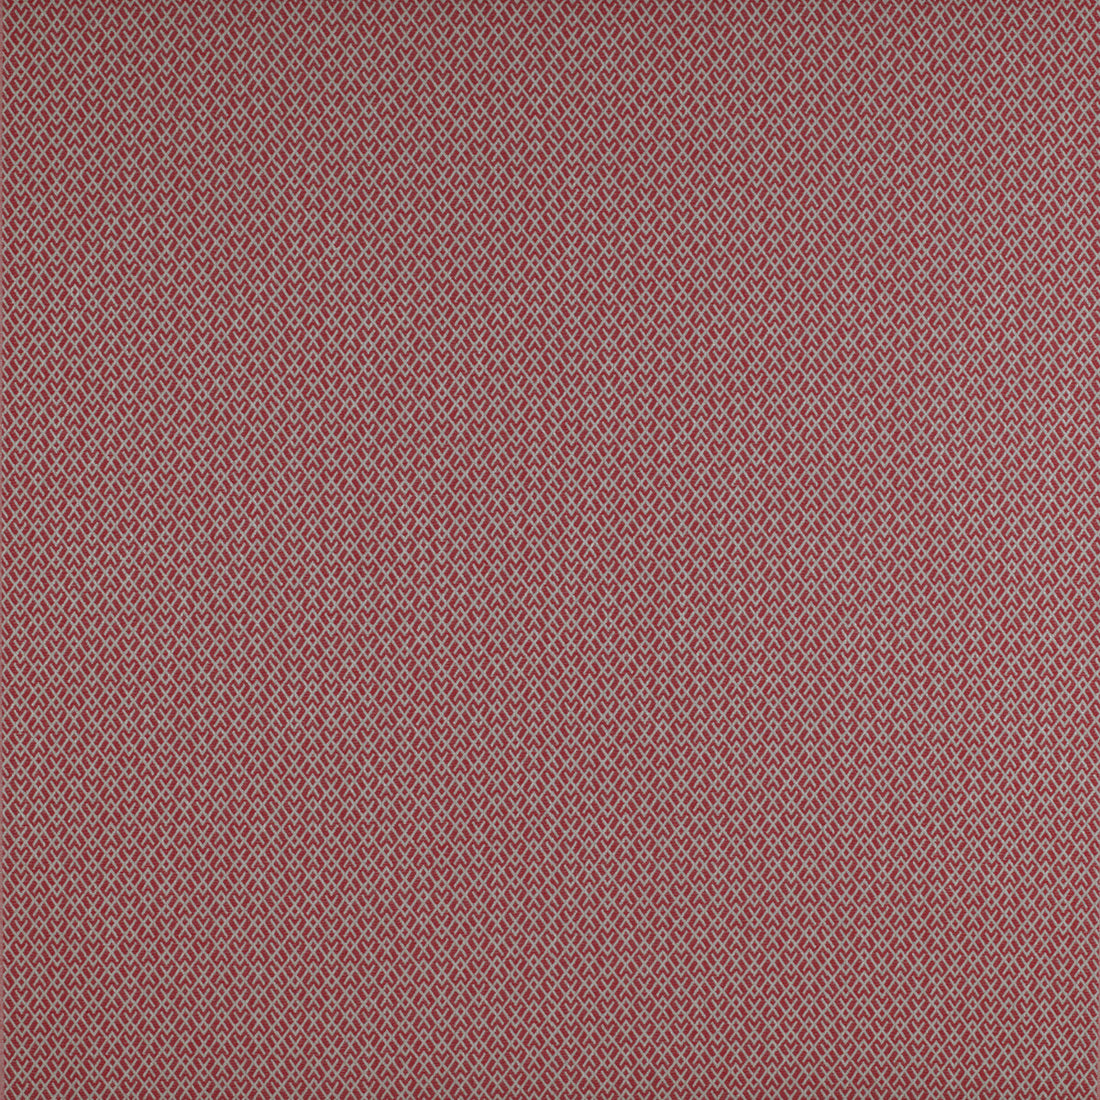 Chueca fabric in rojo color - pattern GDT5205.012.0 - by Gaston y Daniela in the Madrid collection